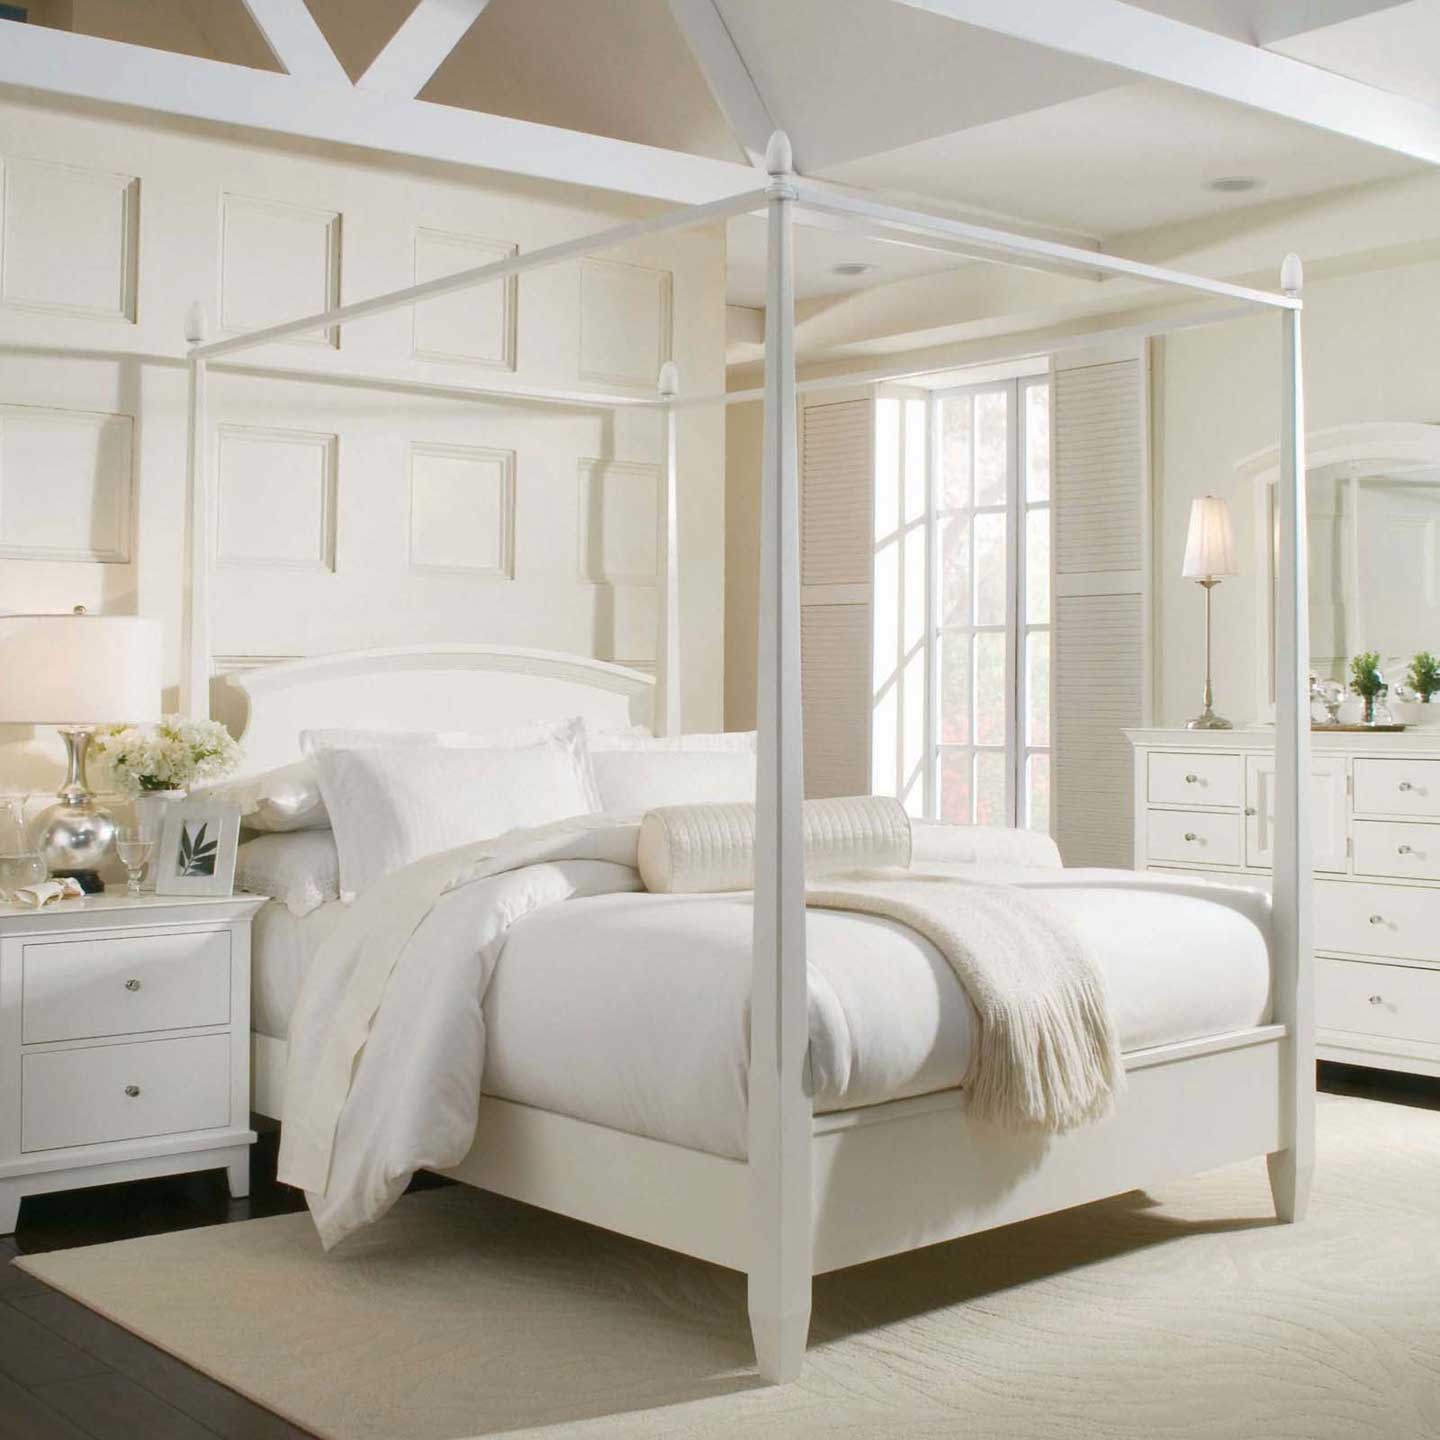 White Master With Fascinating White Master Bedroom Ideas With Canopy Bed For Small Home Designs And Adorable White Spread Bed Idea Also Unique White Colored Headboard Plus Interesting Sleep Lamp Design Bedroom Master Bedroom Ideas: Considering The Aspects